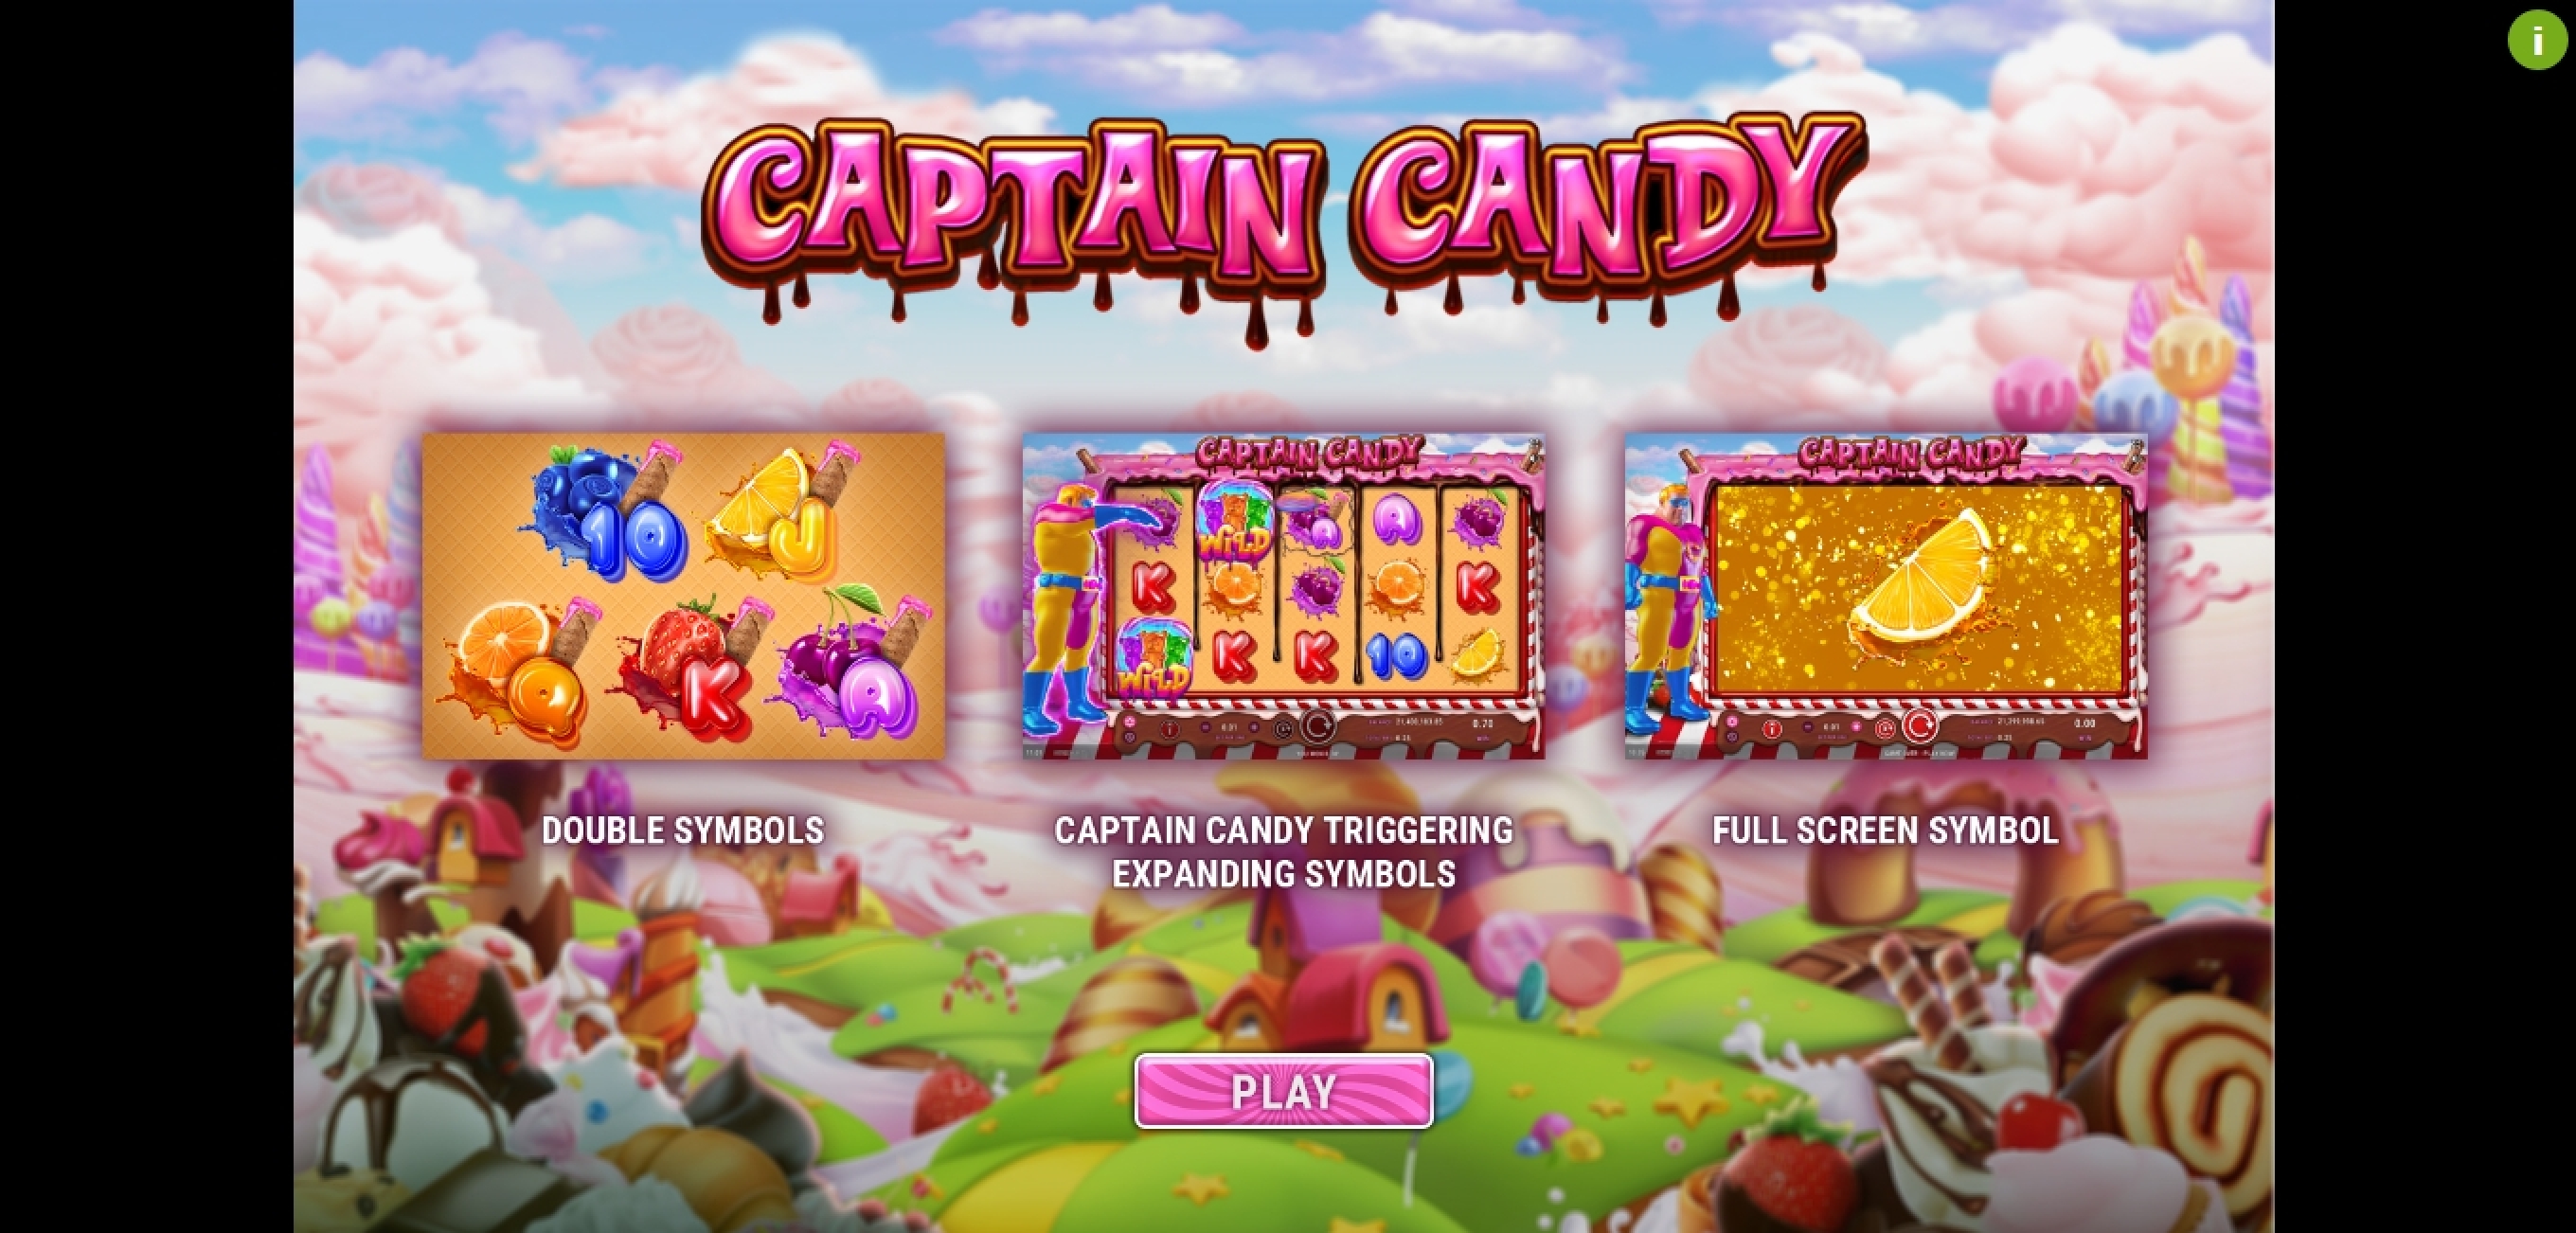 Play Captain Candy Free Casino Slot Game by GameArt